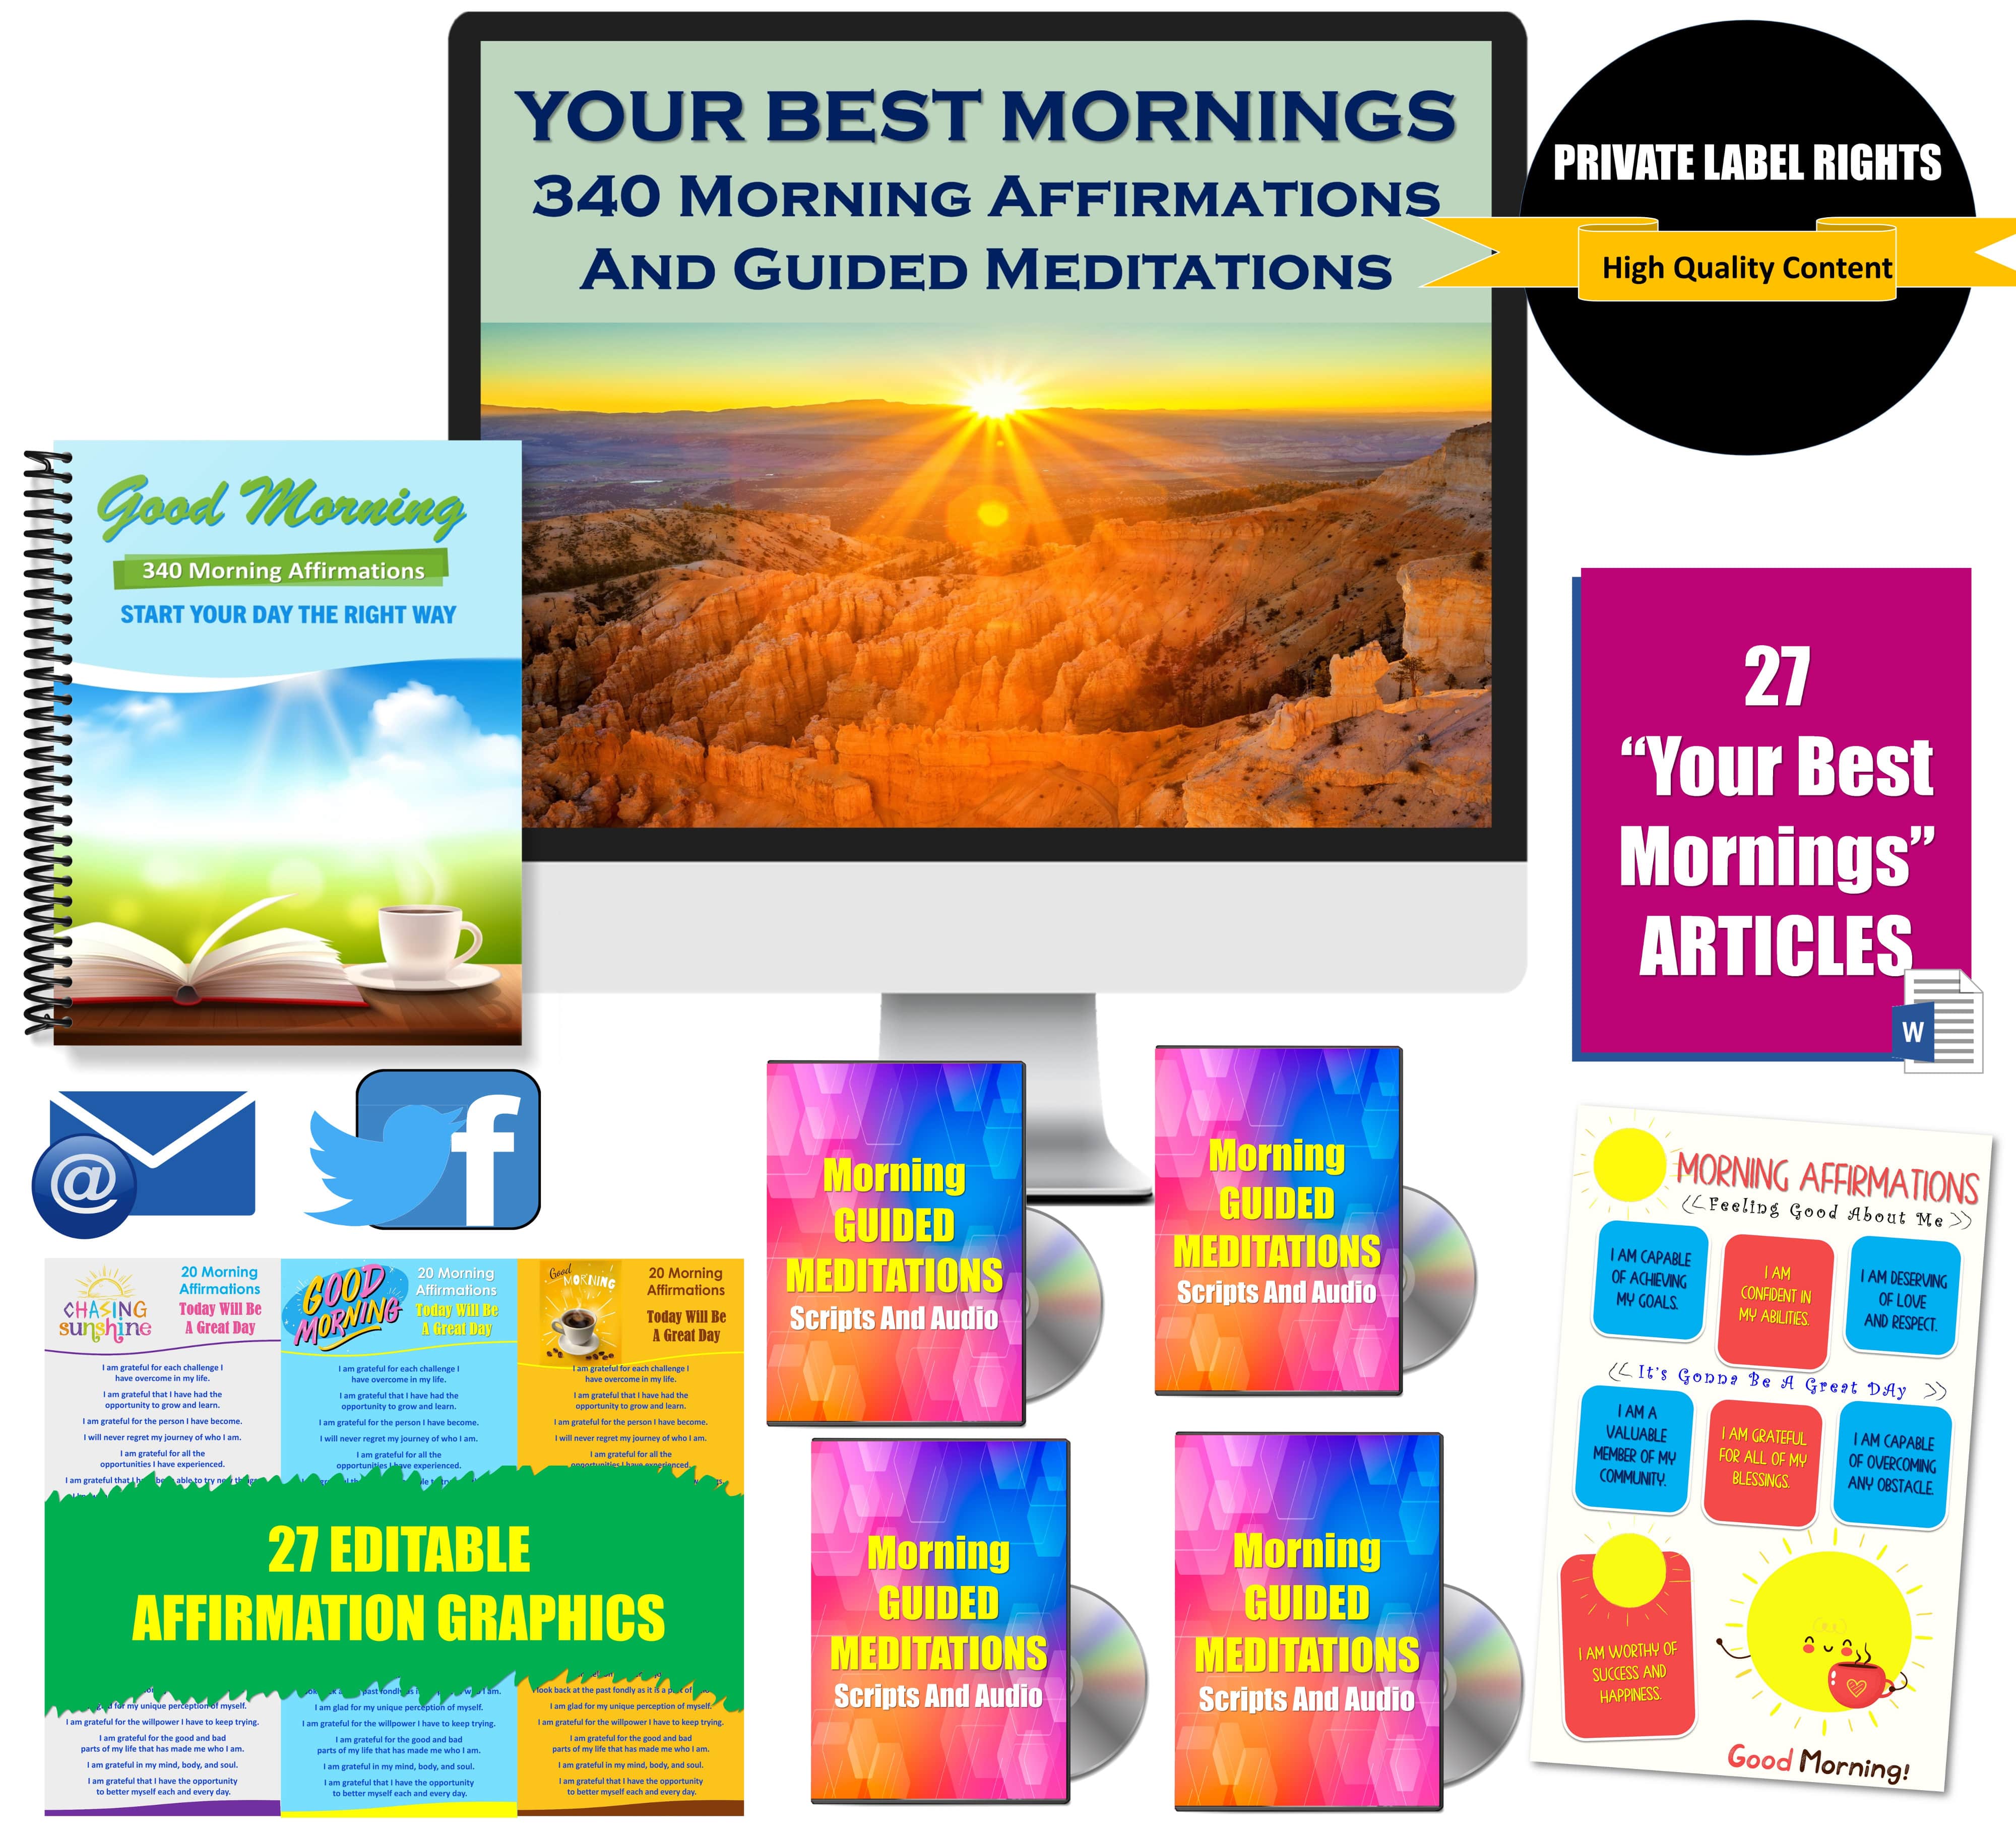 Your Best Mornings: 340 Morning Affirmations + Guided Meditations Giant Content Pack PLR Rights